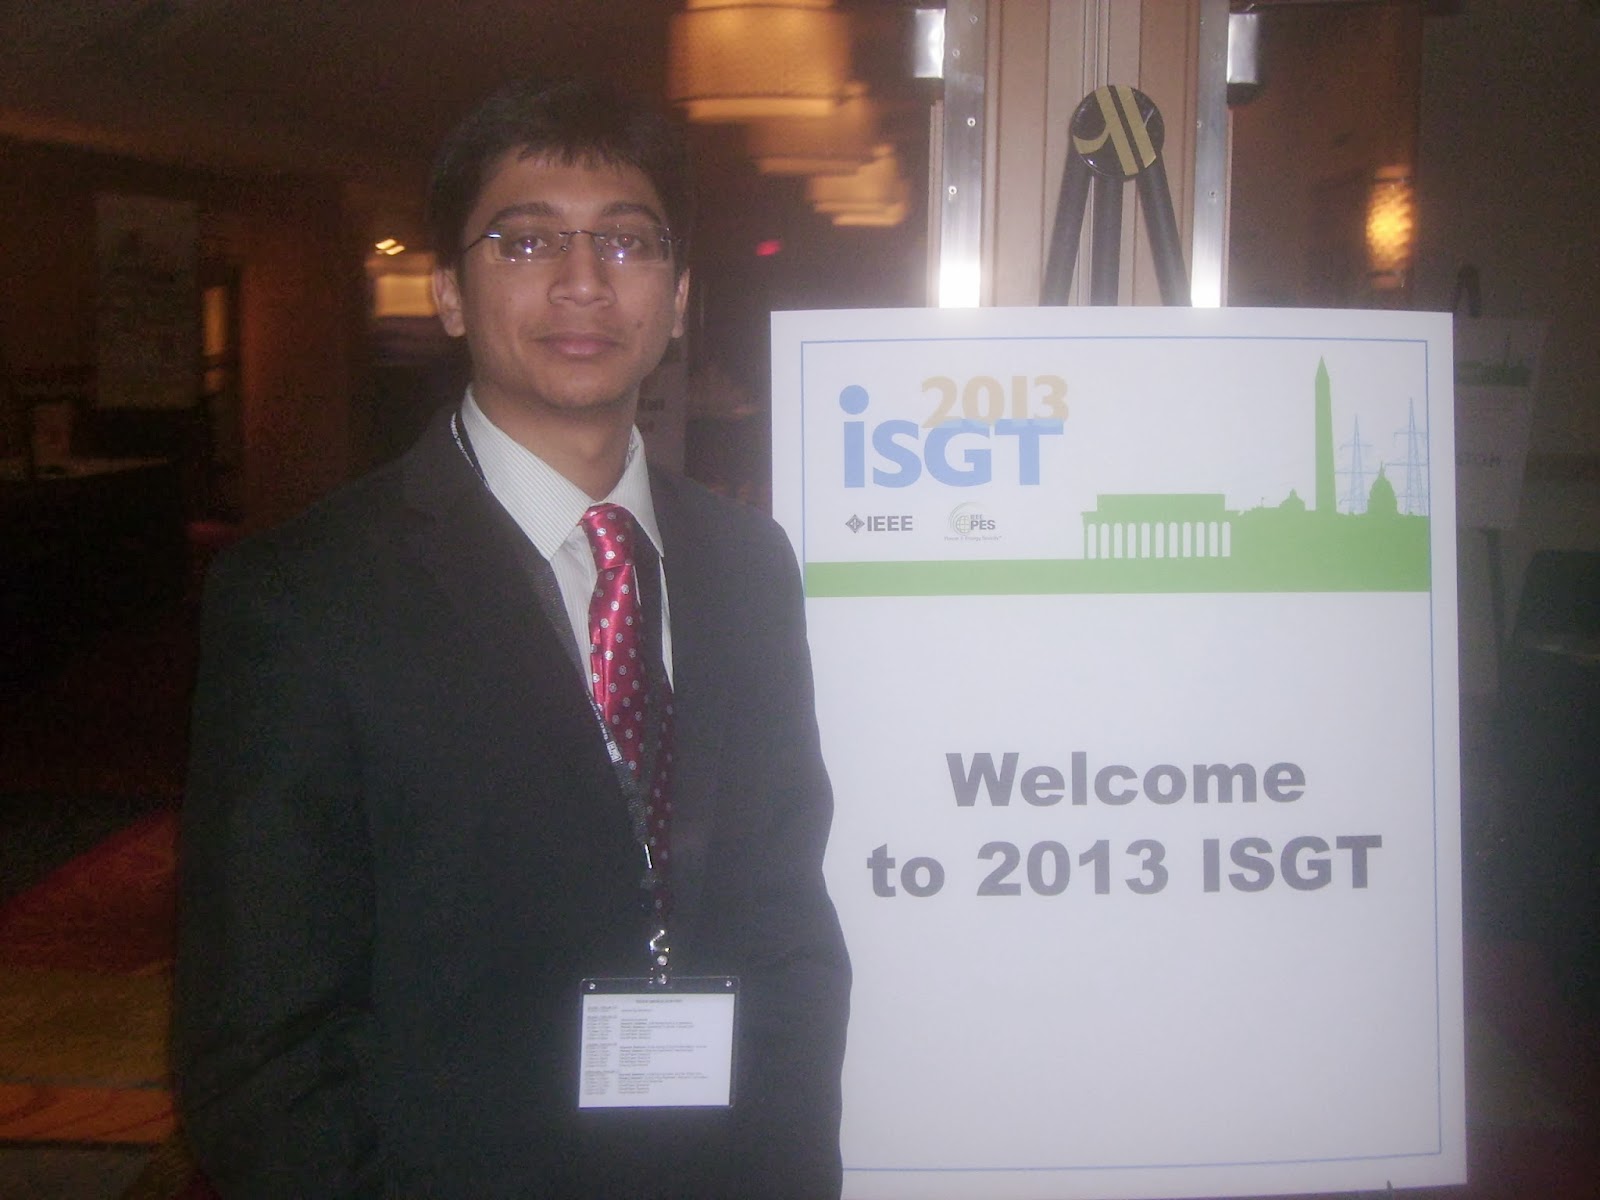 EPES Lab Members are presenting papers at the IEEE PES ISGT Conference, held at Washington DC, USA, February 24-27, 2013